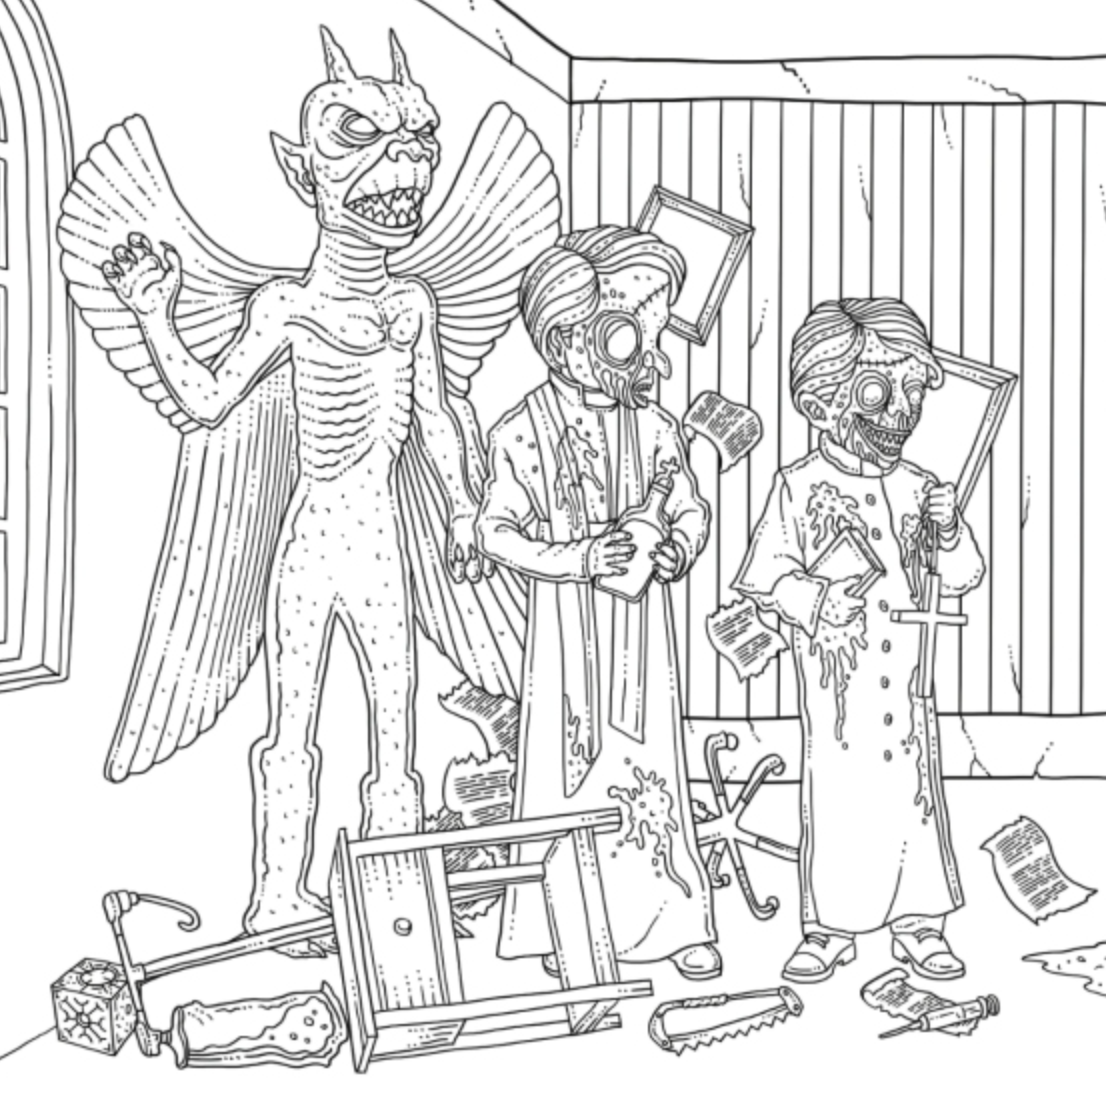 The Beauty Of Horror 4 Coloring Book / Alan Robert On Twitter This Week